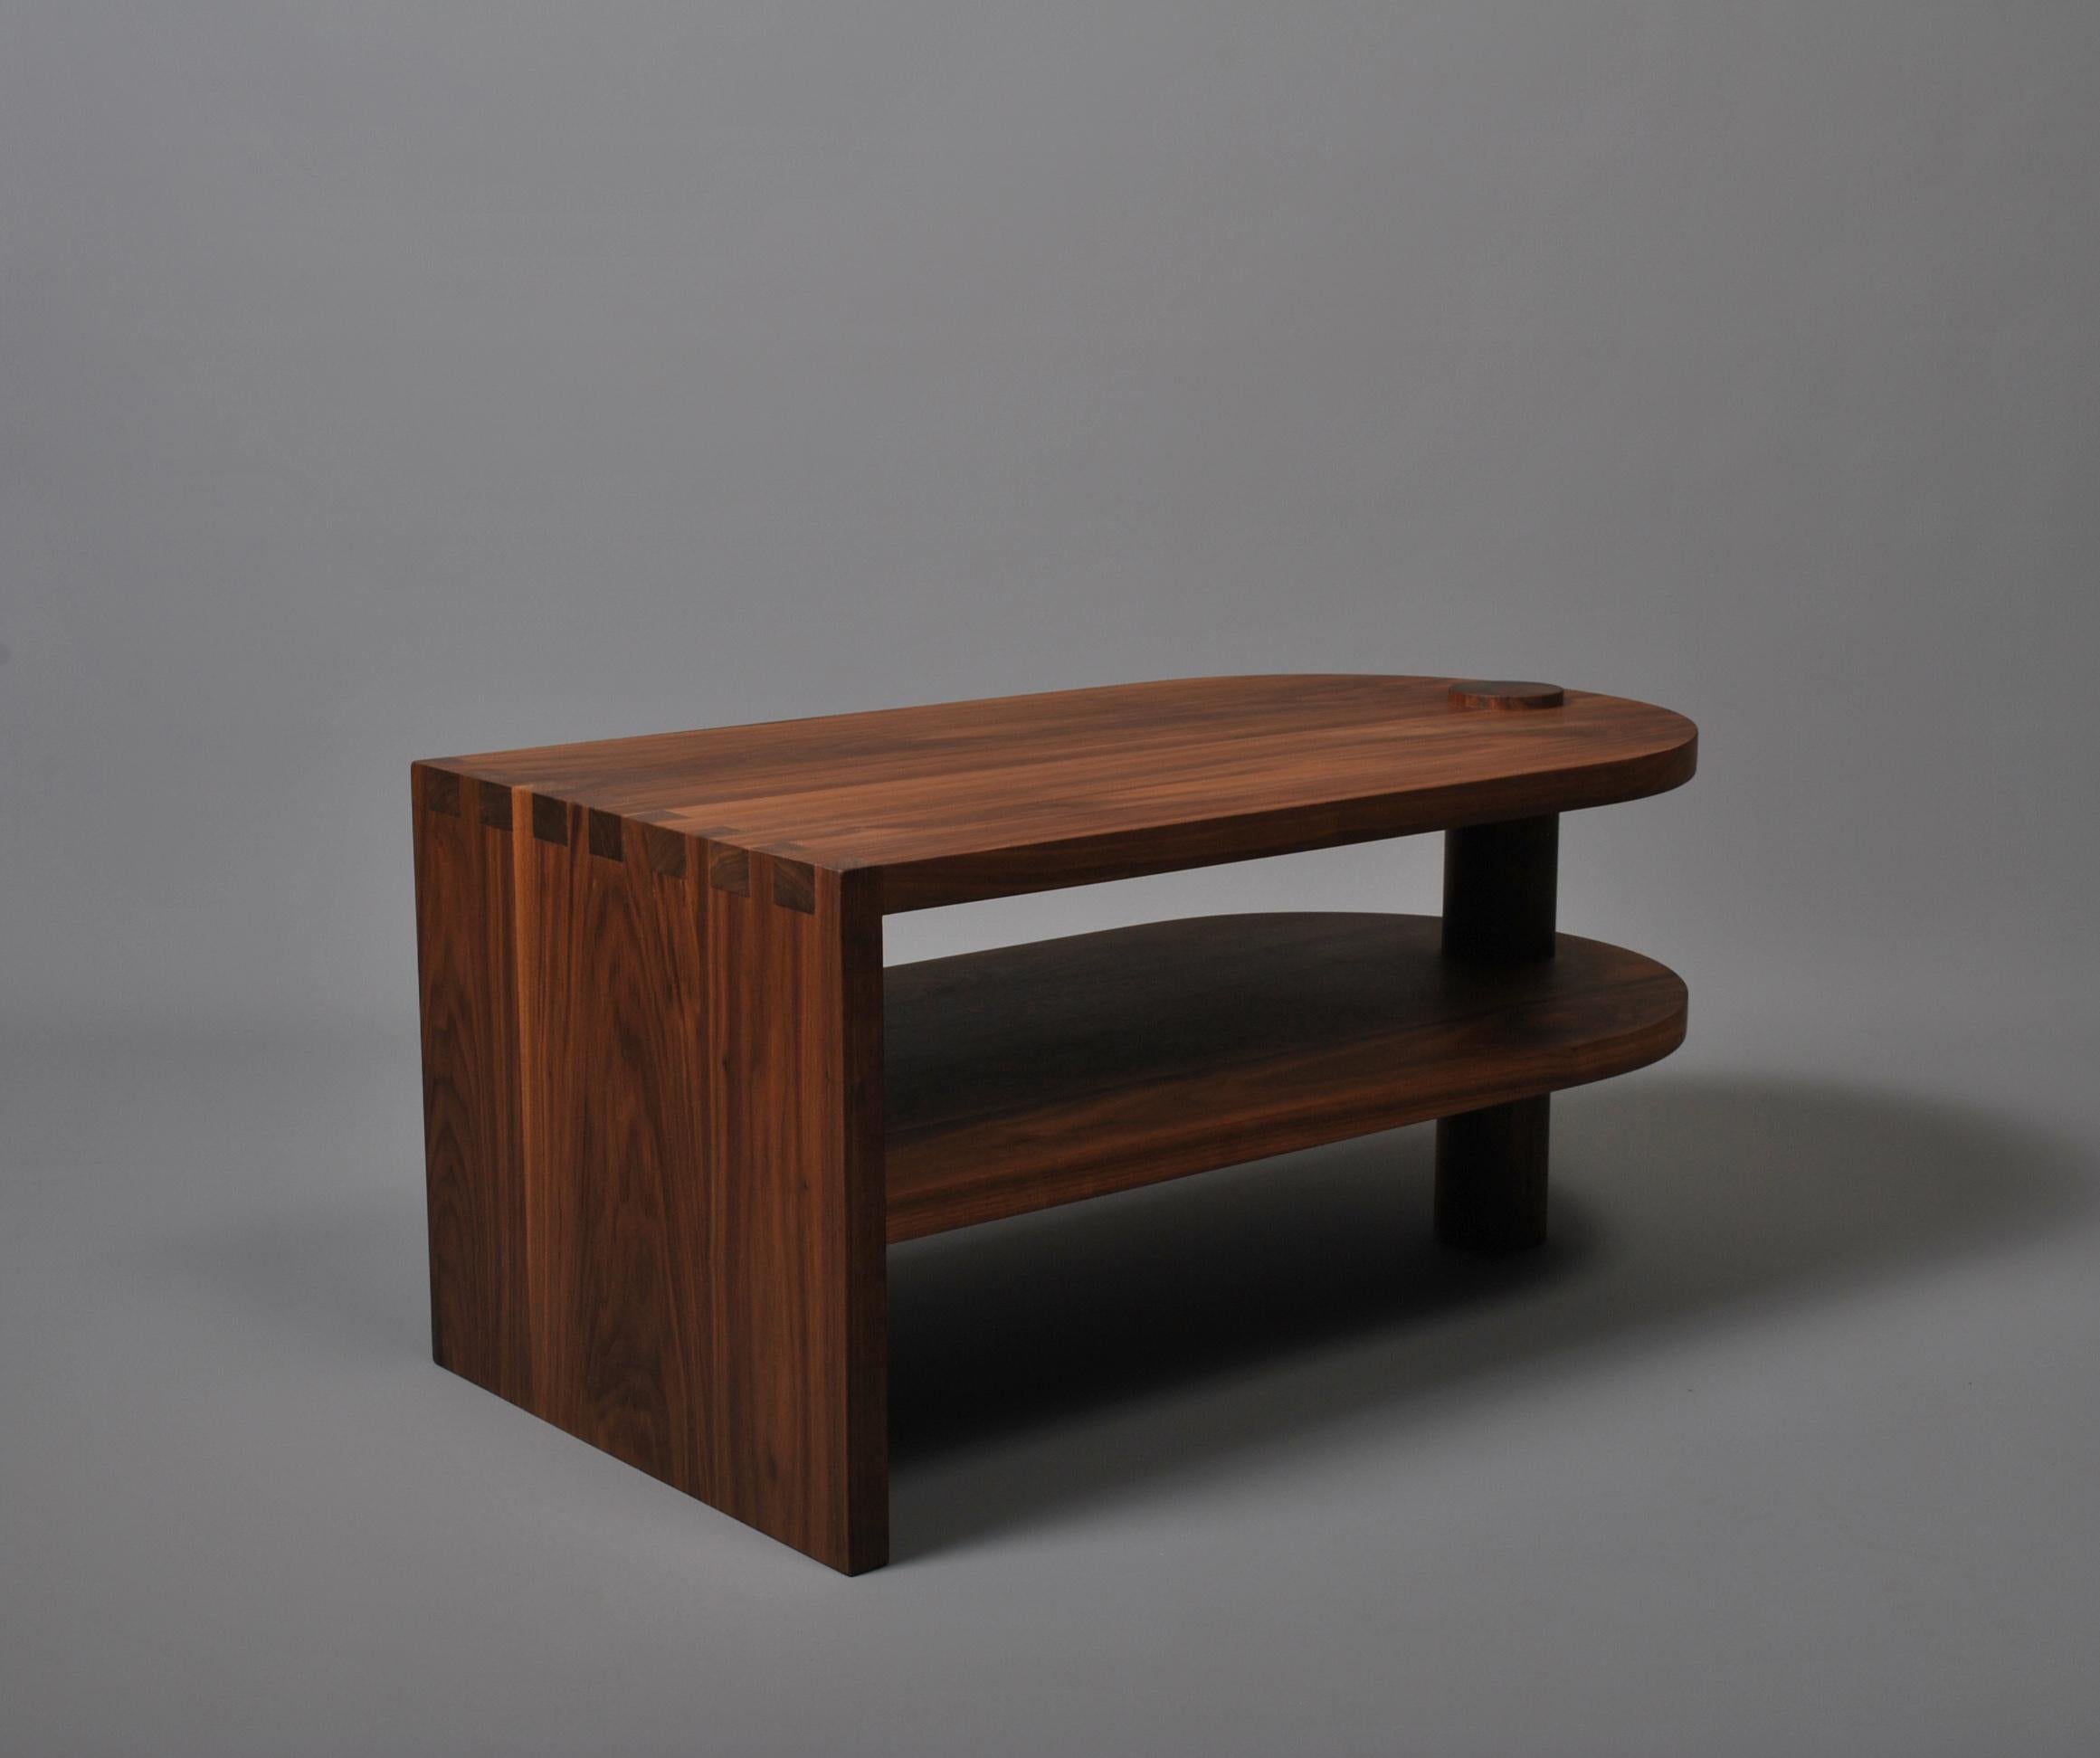 Hand-Crafted Handcrafted Architectural Walnut Coffee Table For Sale